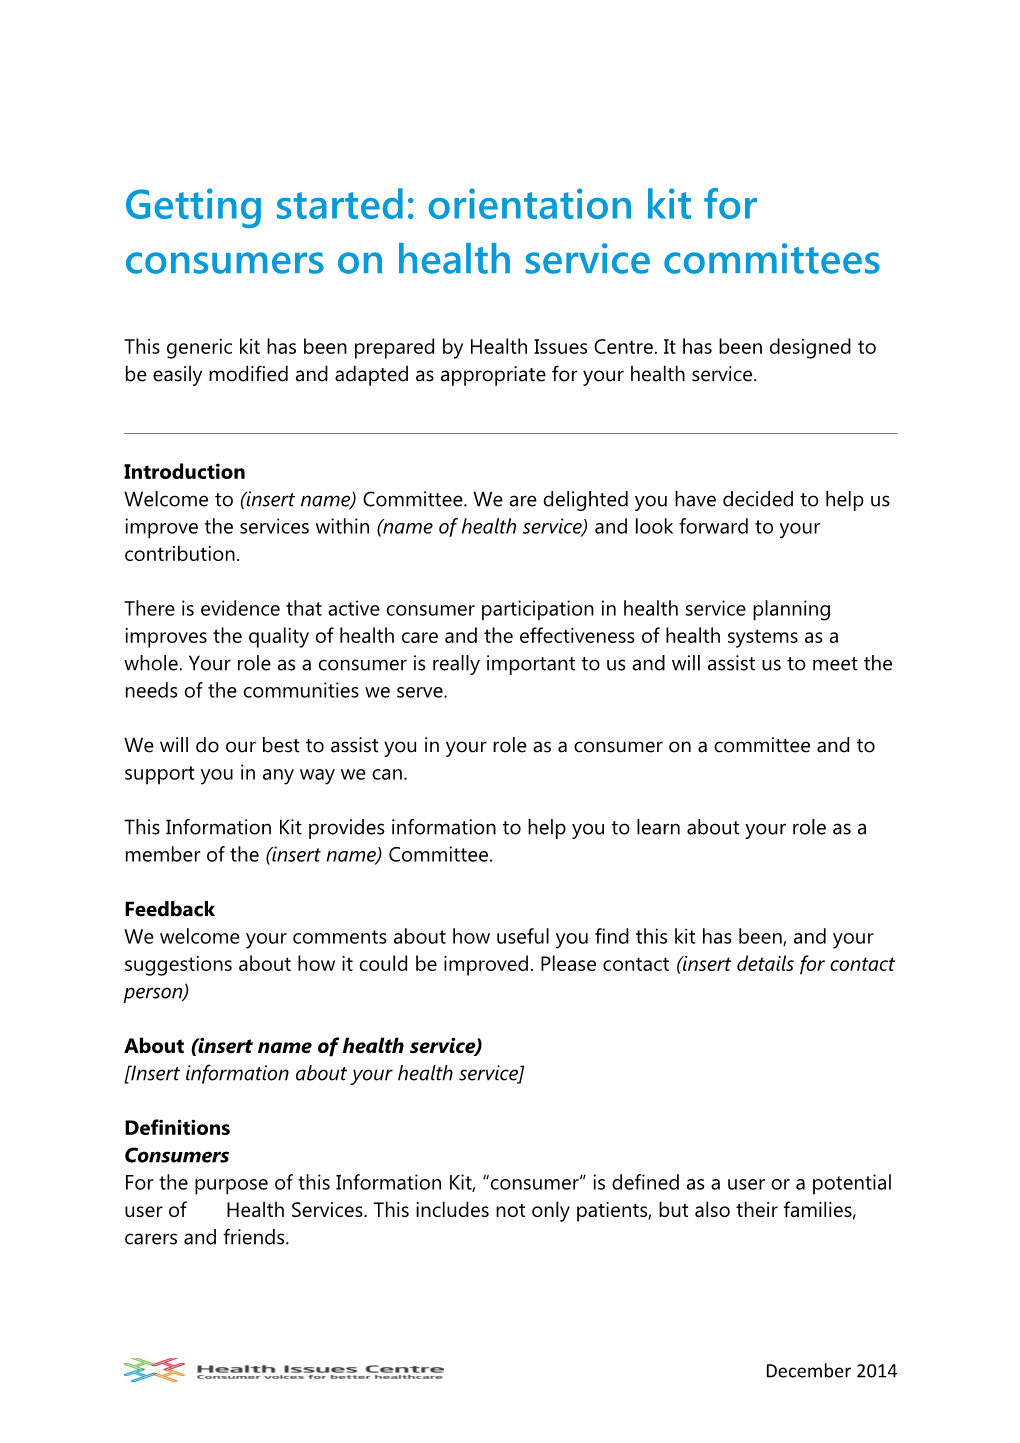 Getting Started: Orientation Kit for Consumers on Health Service Committees